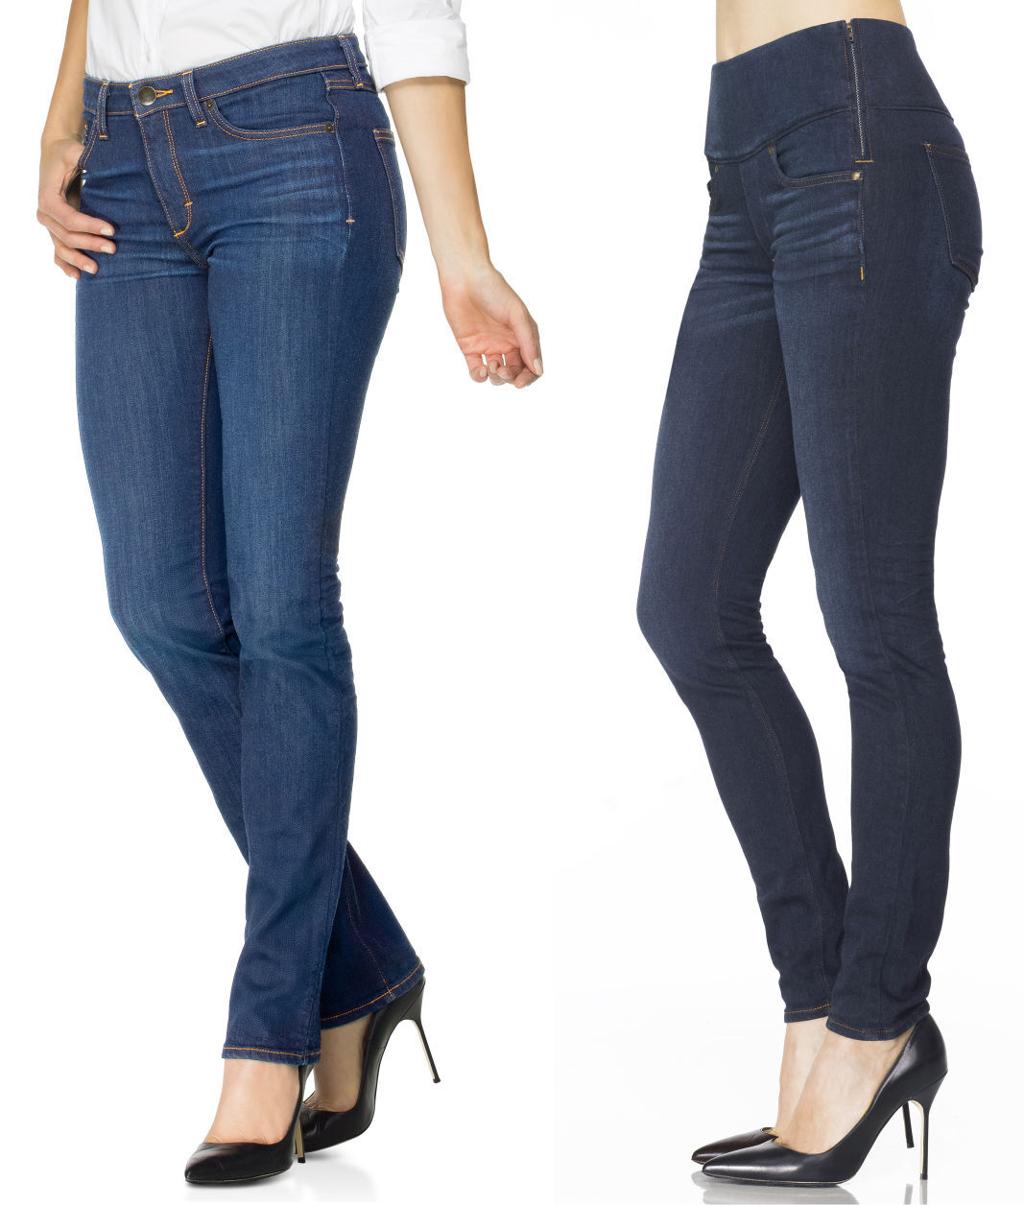 Spanx stretches into new territory with jeans, but promised magic is  elusive, Edmond